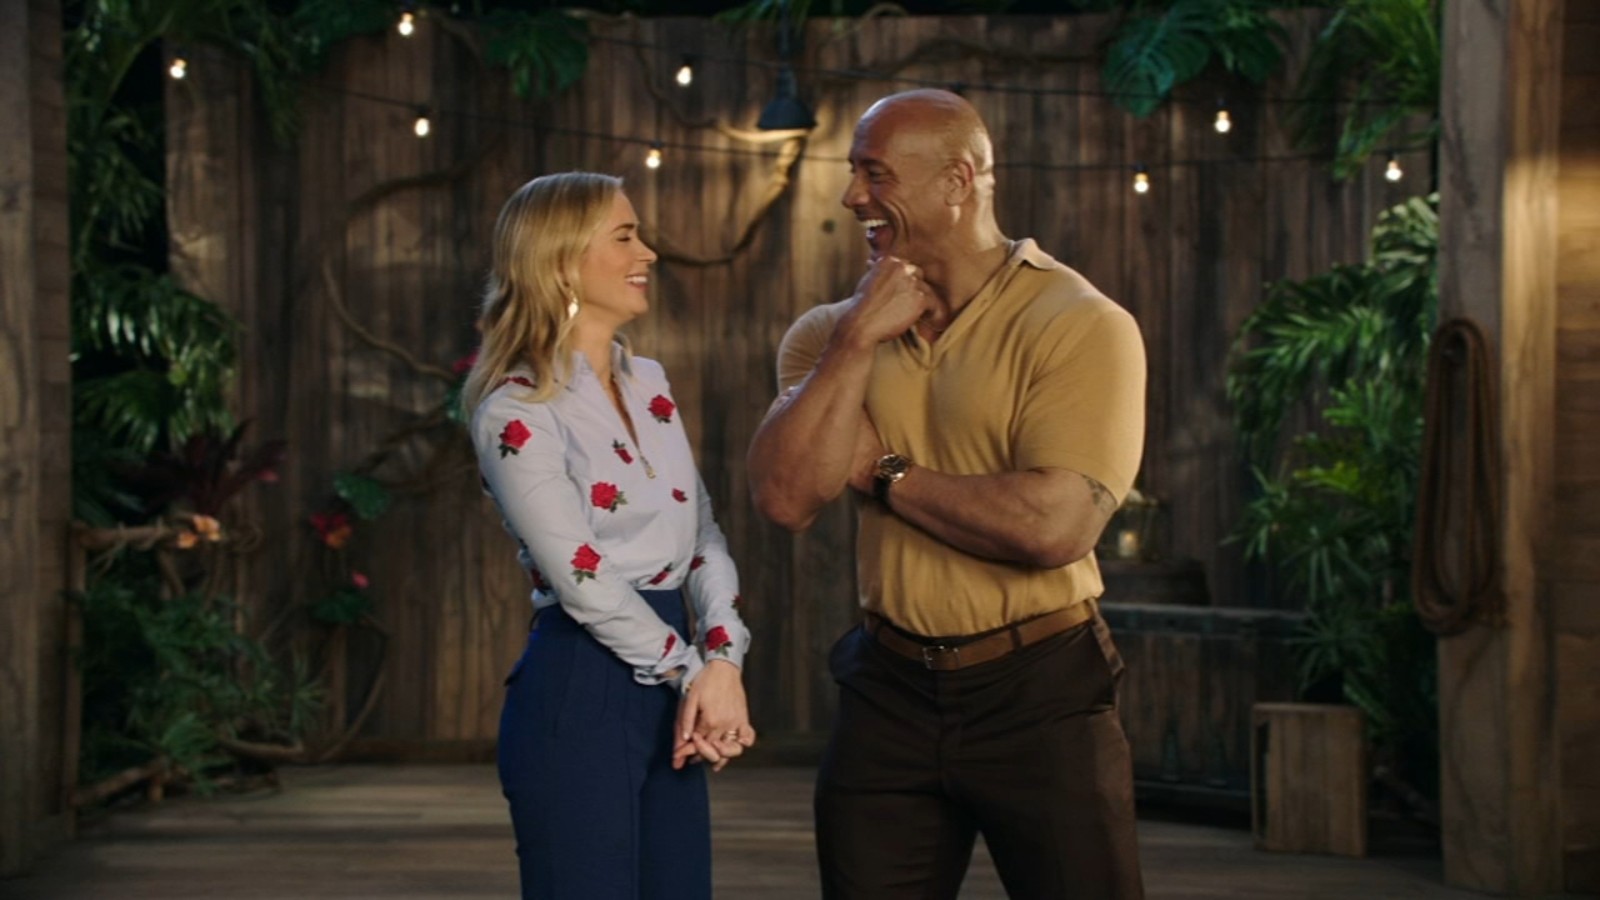 Dwayne Johnson and Emily Blunt promoting Jungle Cruise